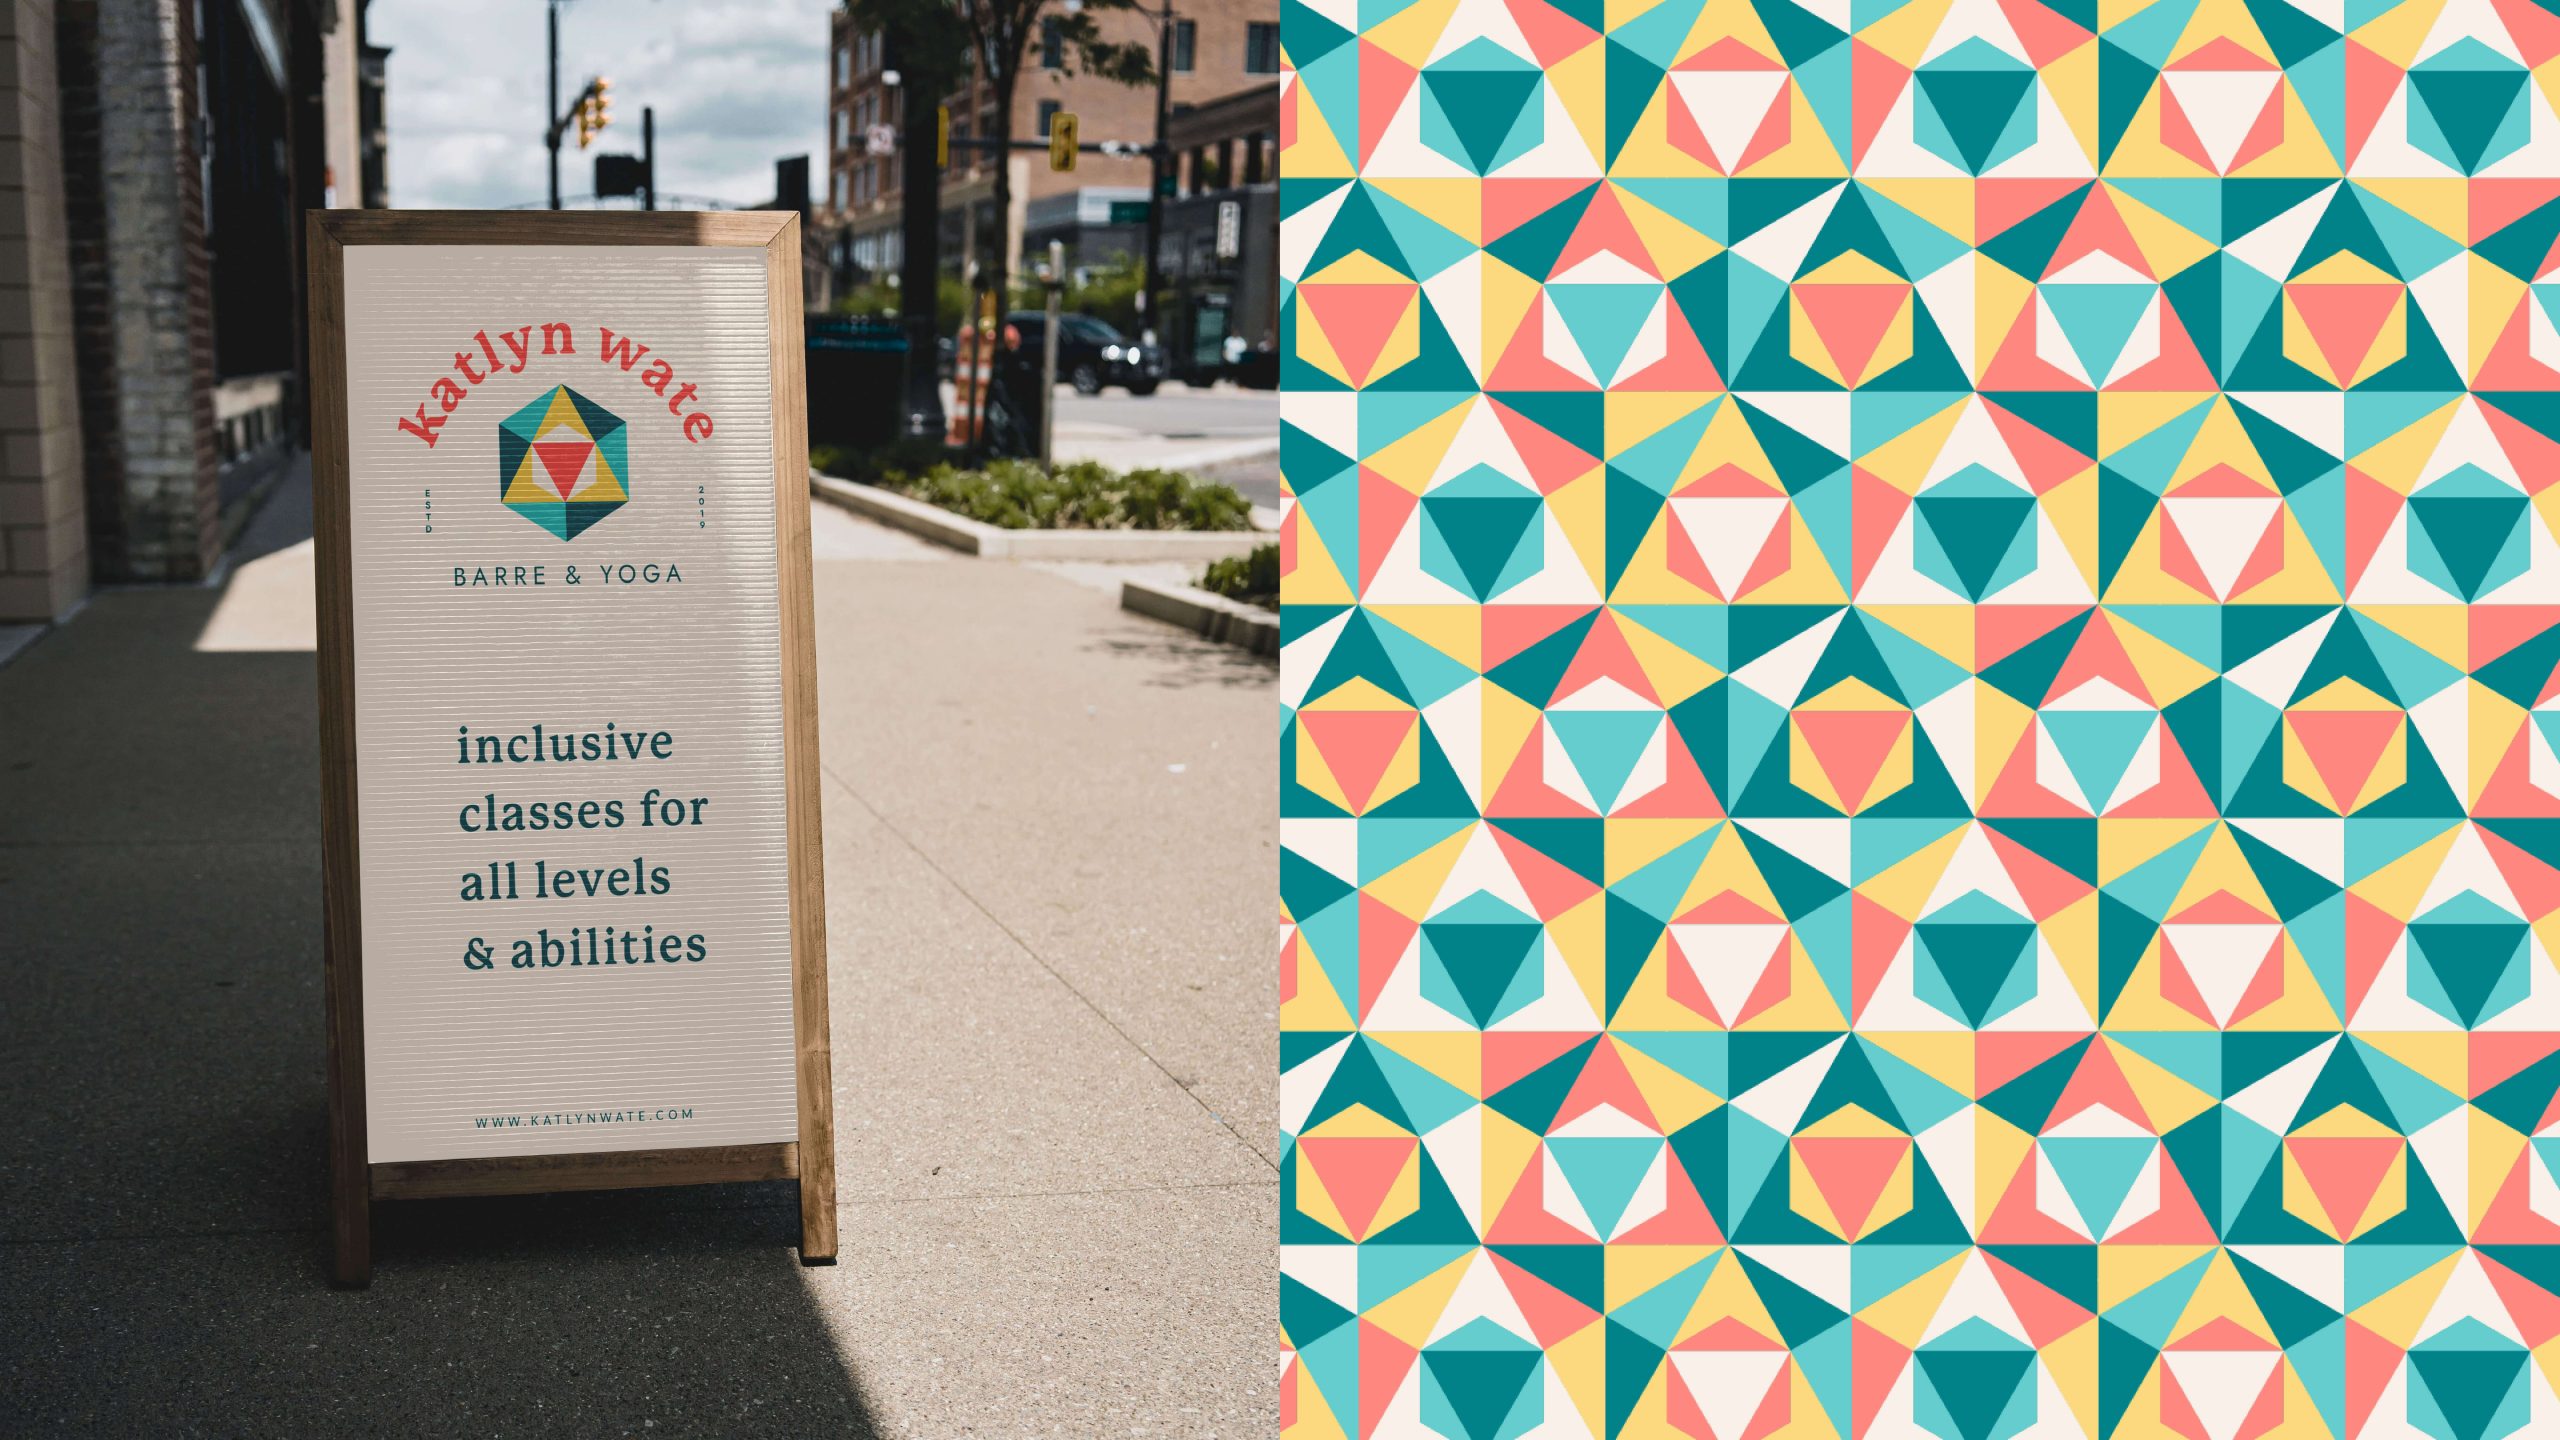 Mockup of a sandwhichboard advertising Katlyn's inclusive barre and yoga classe. Half of the image is of a custom pattern made up of triangles that tesselate.